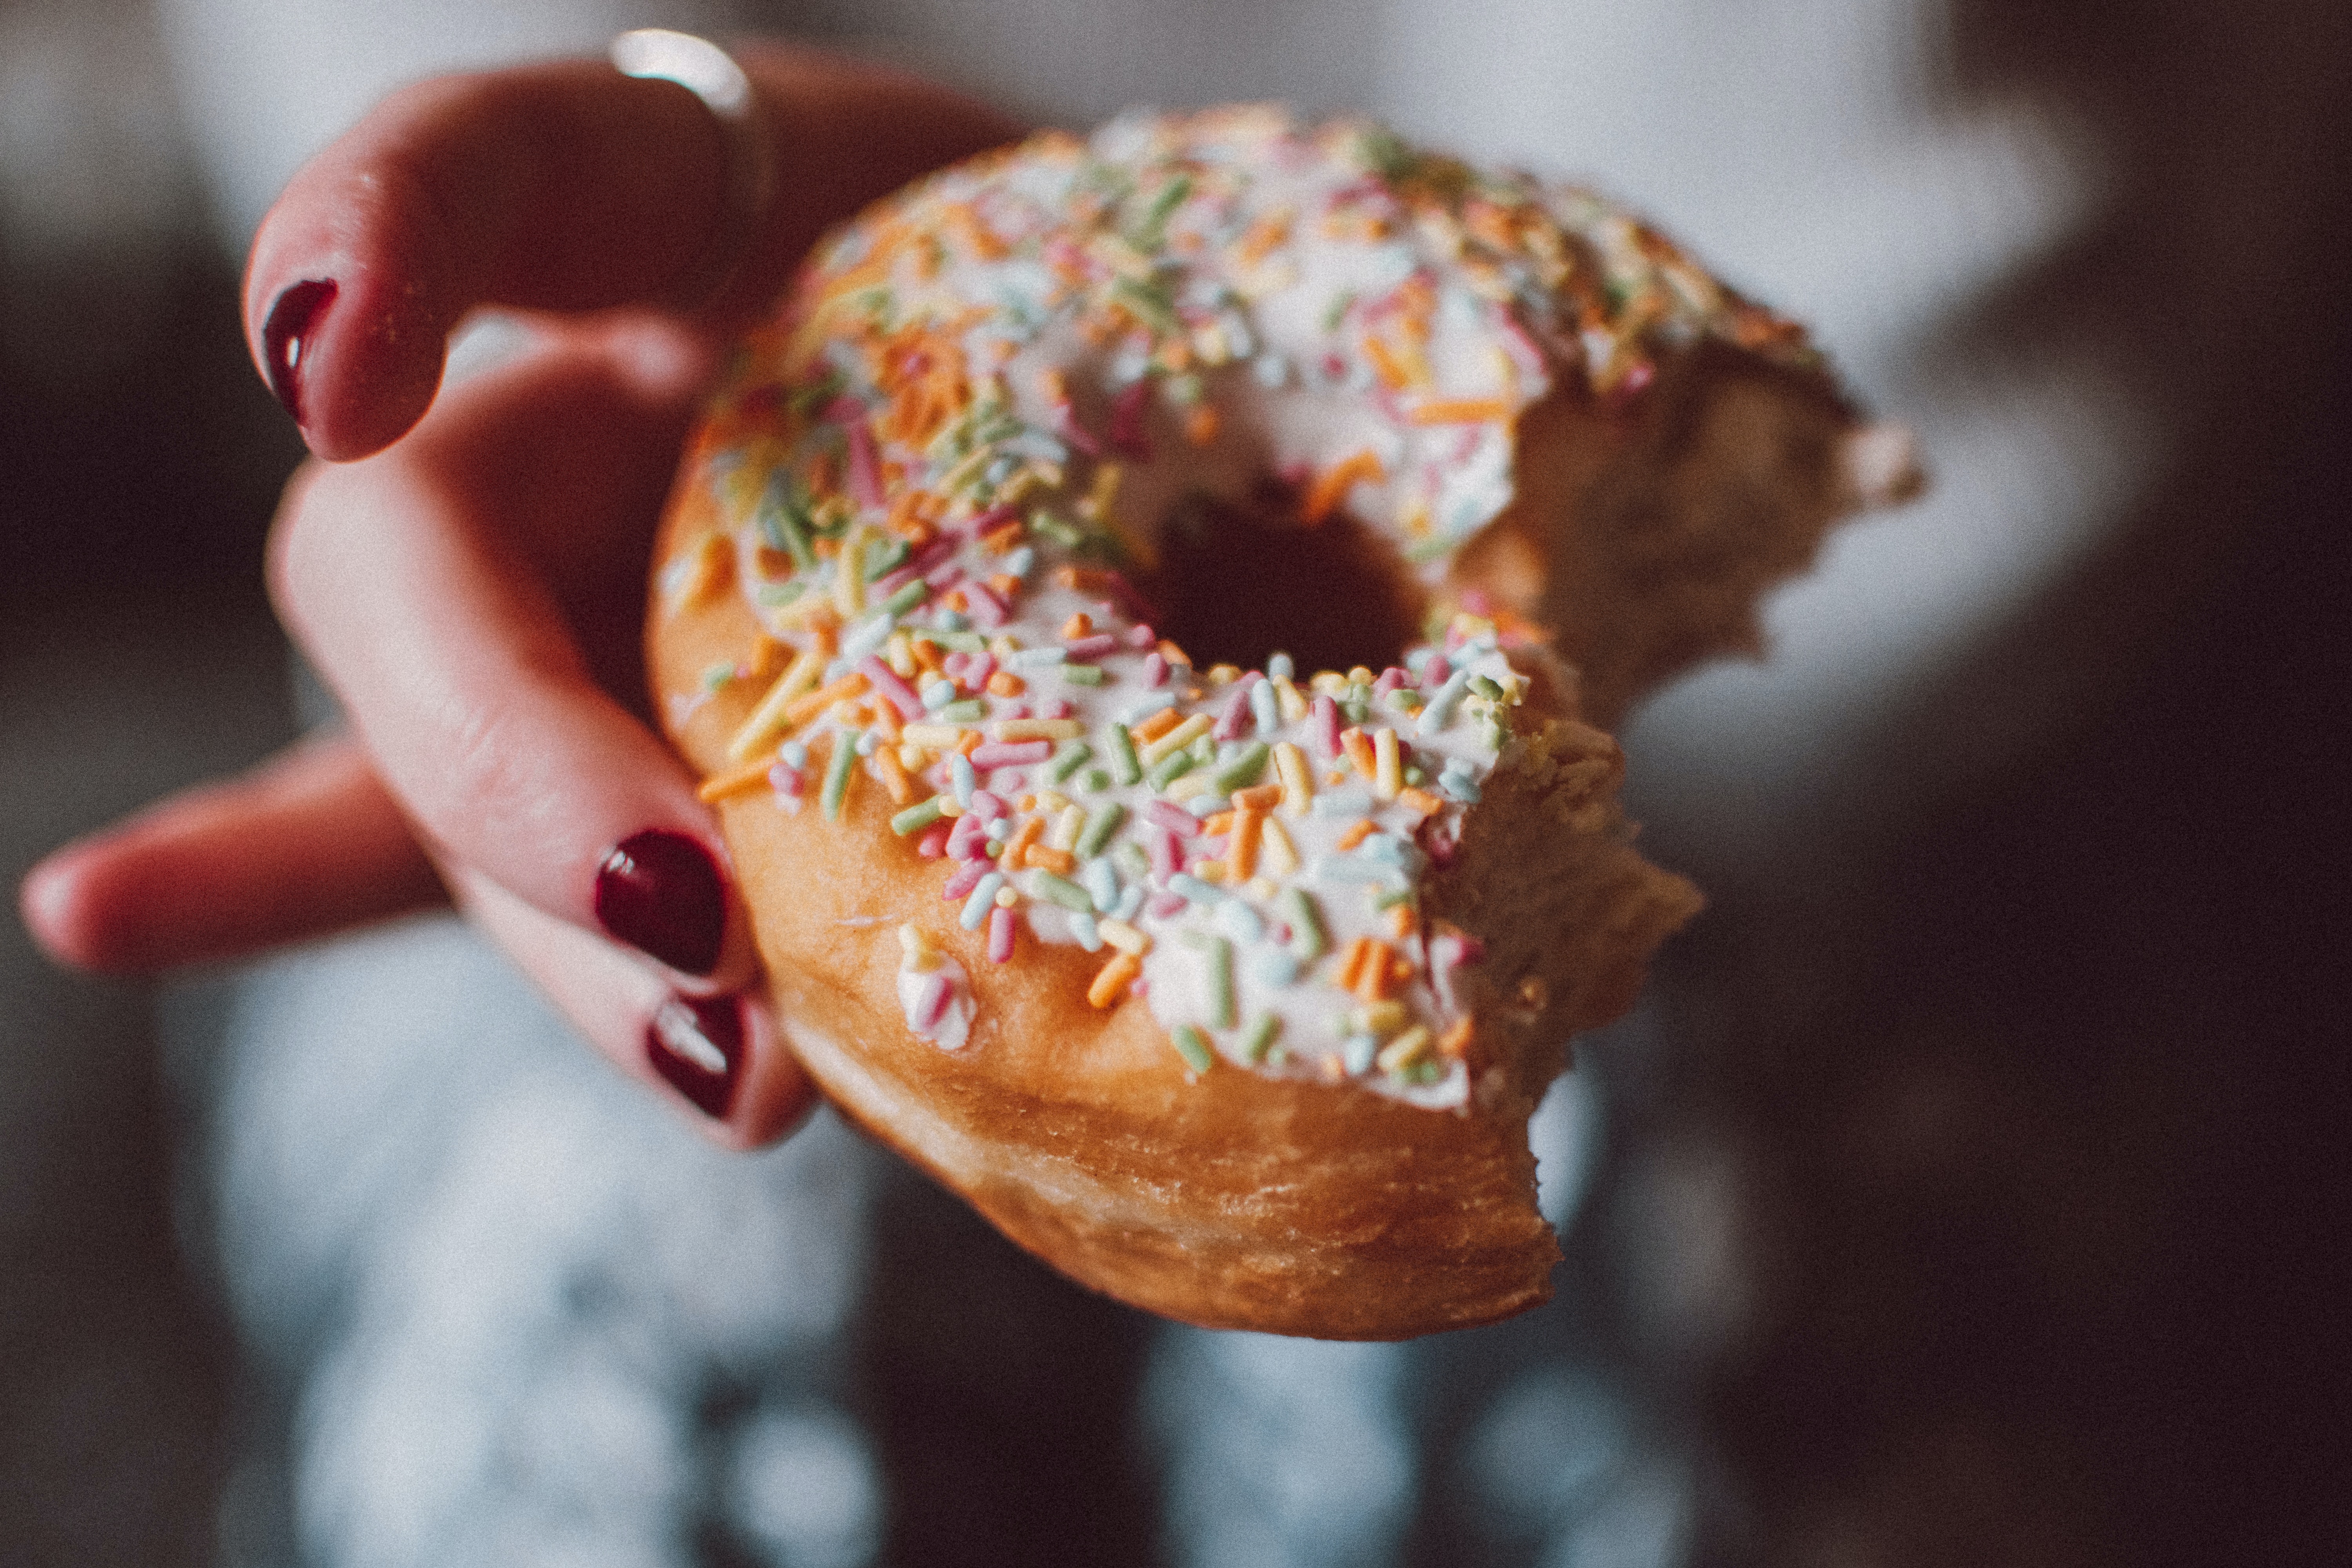 Here's how to score free sweets on National Donut Day.